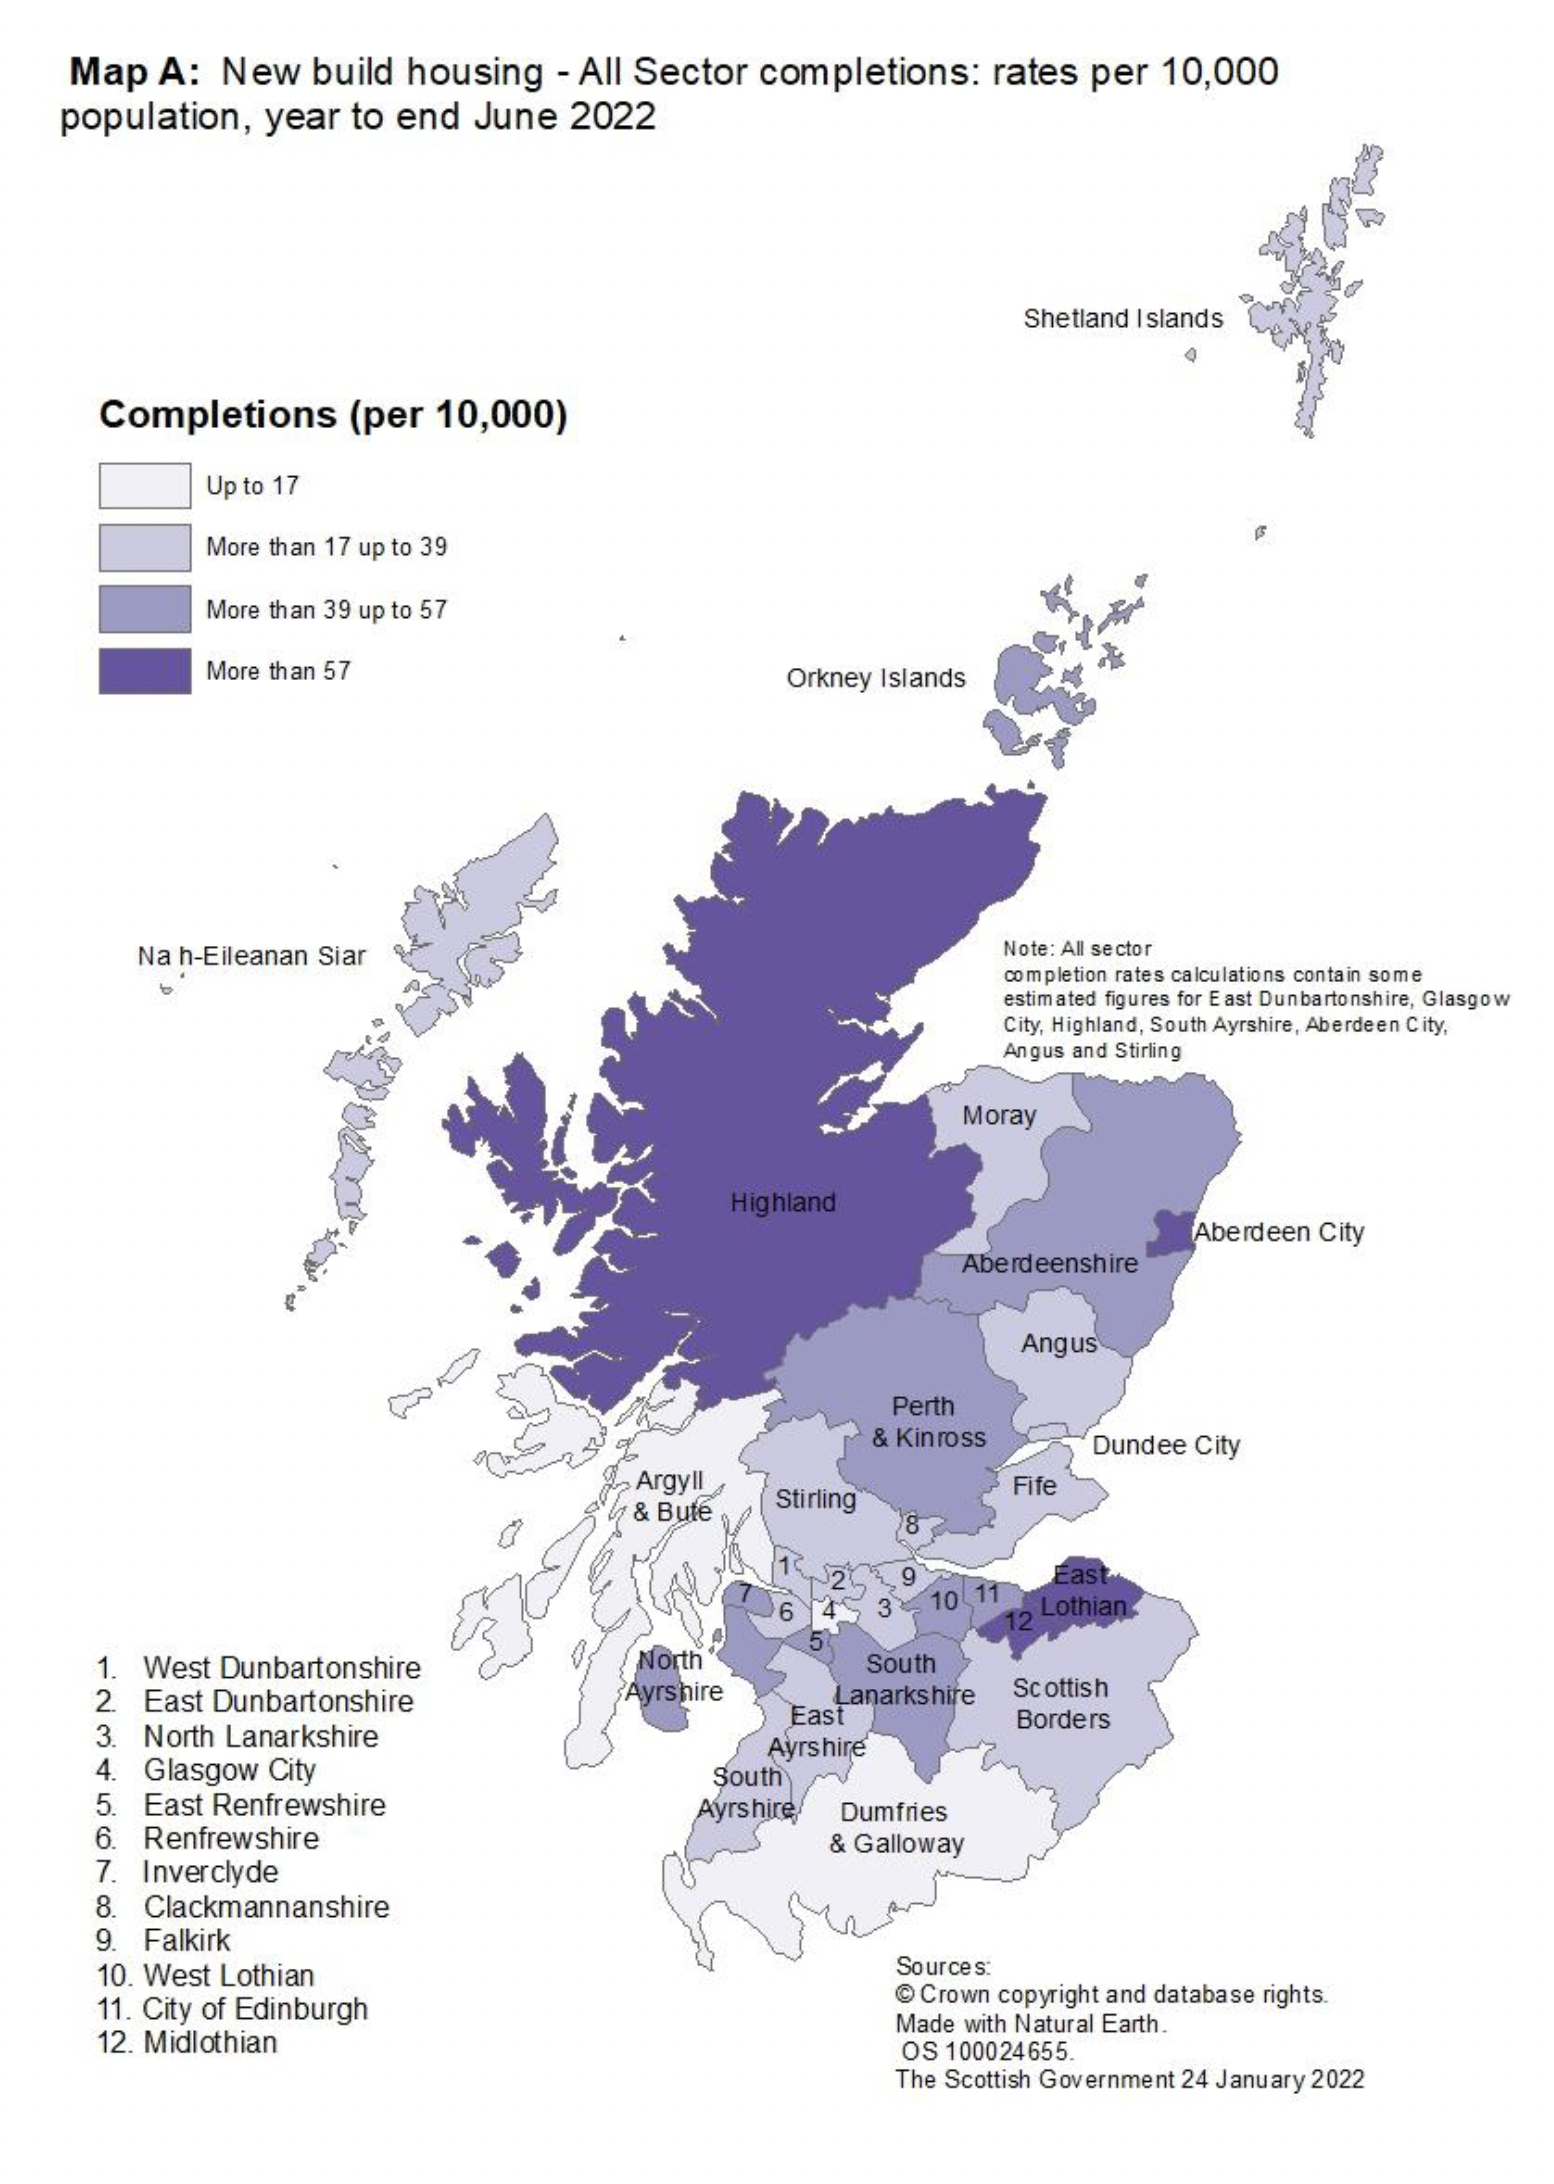 Map A: New build housing – A map of local authority areas in Scotland showing all-sector completion rates per 10,000 population for year to end June 2022. The highest rates were observed in Midlothian, Aberdeen City, Highland, East Lothian, with the lowest rates in Argyll & Bute, Dumfries & Galloway and Glasgow City